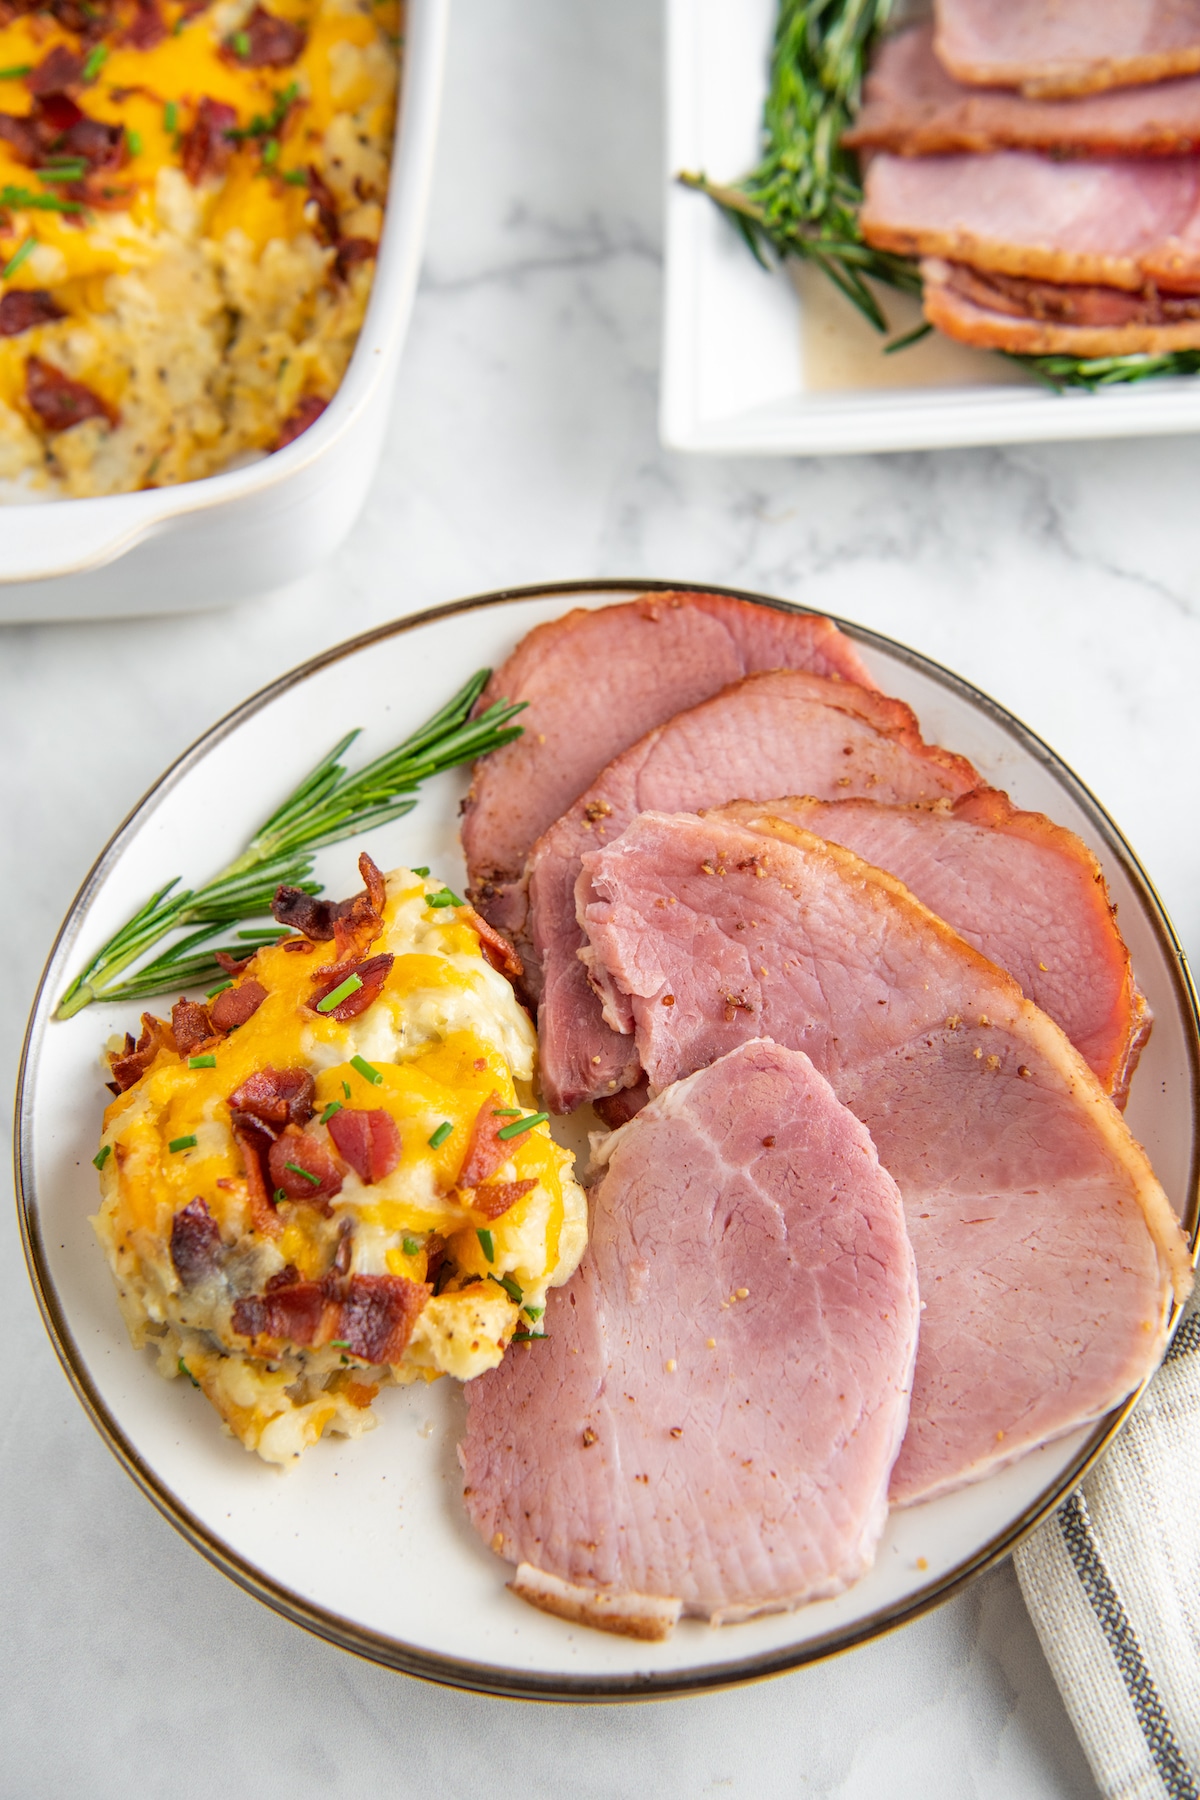 Slices of ham on a white plate with mashed potatoes and fresh rosemary.